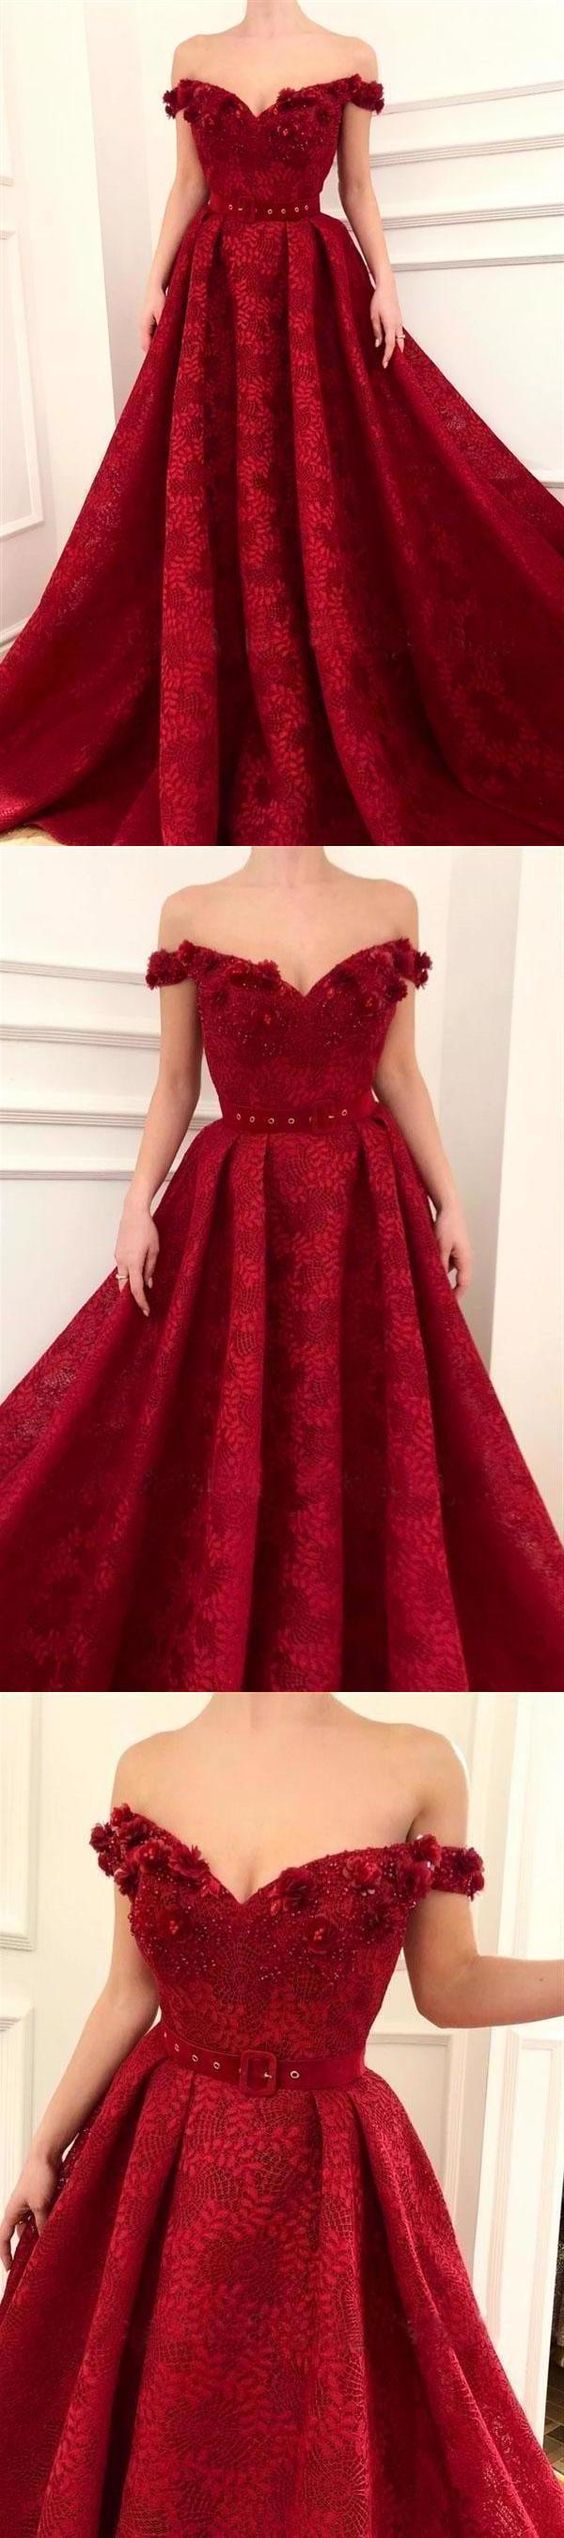 Charming Red Lace Off the Shoulder Prom Dresses, V Neck Handmade Flowers Party Dresses  cg8812